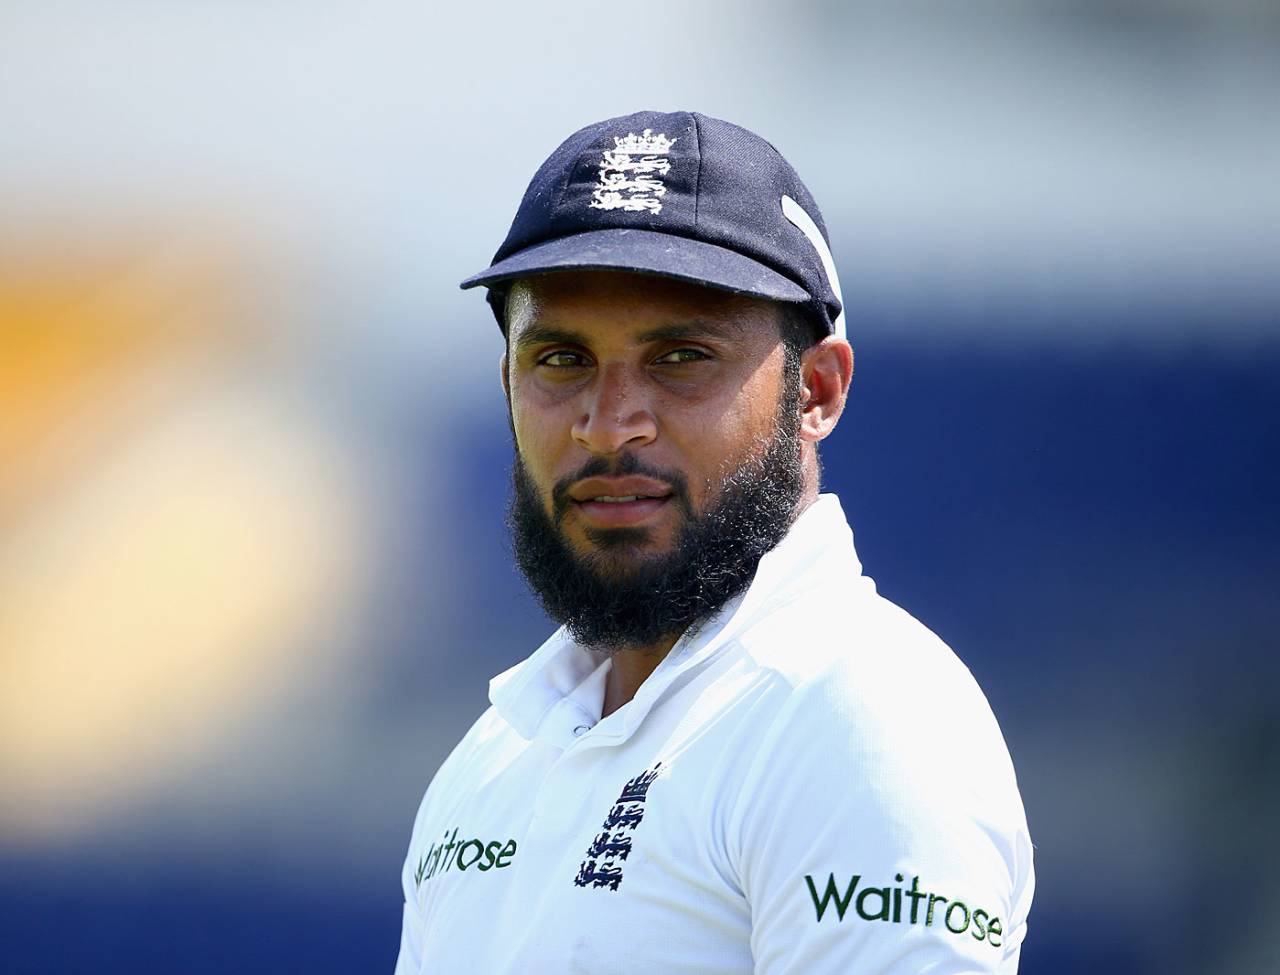 Adil Rashid's performances might flicker, but England will need to be patient with him&nbsp;&nbsp;&bull;&nbsp;&nbsp;Getty Images